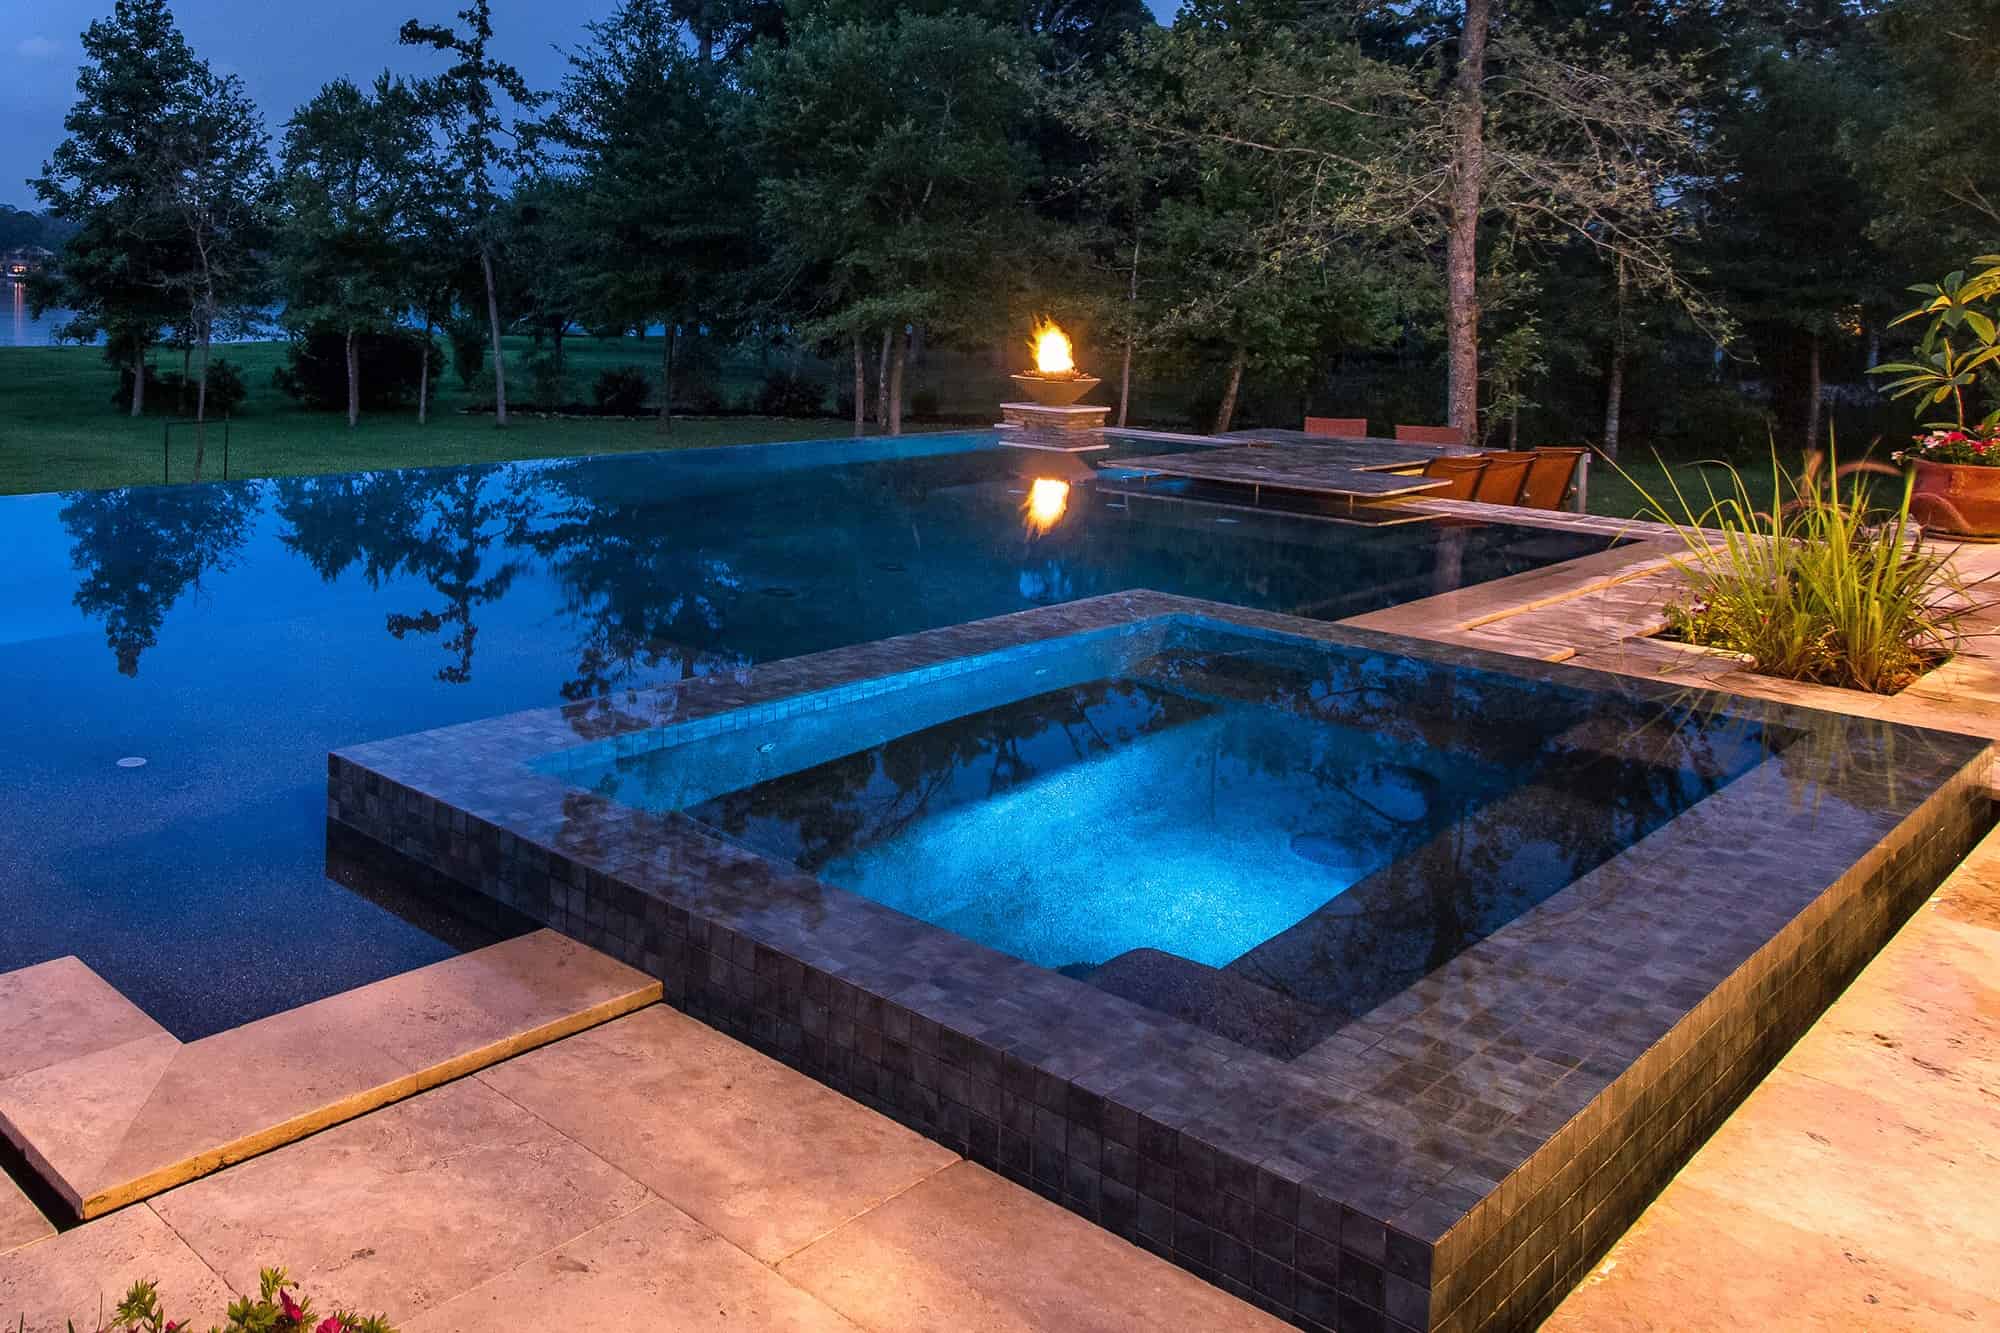 Pool-Spa Features by Your Houston Pool Builder